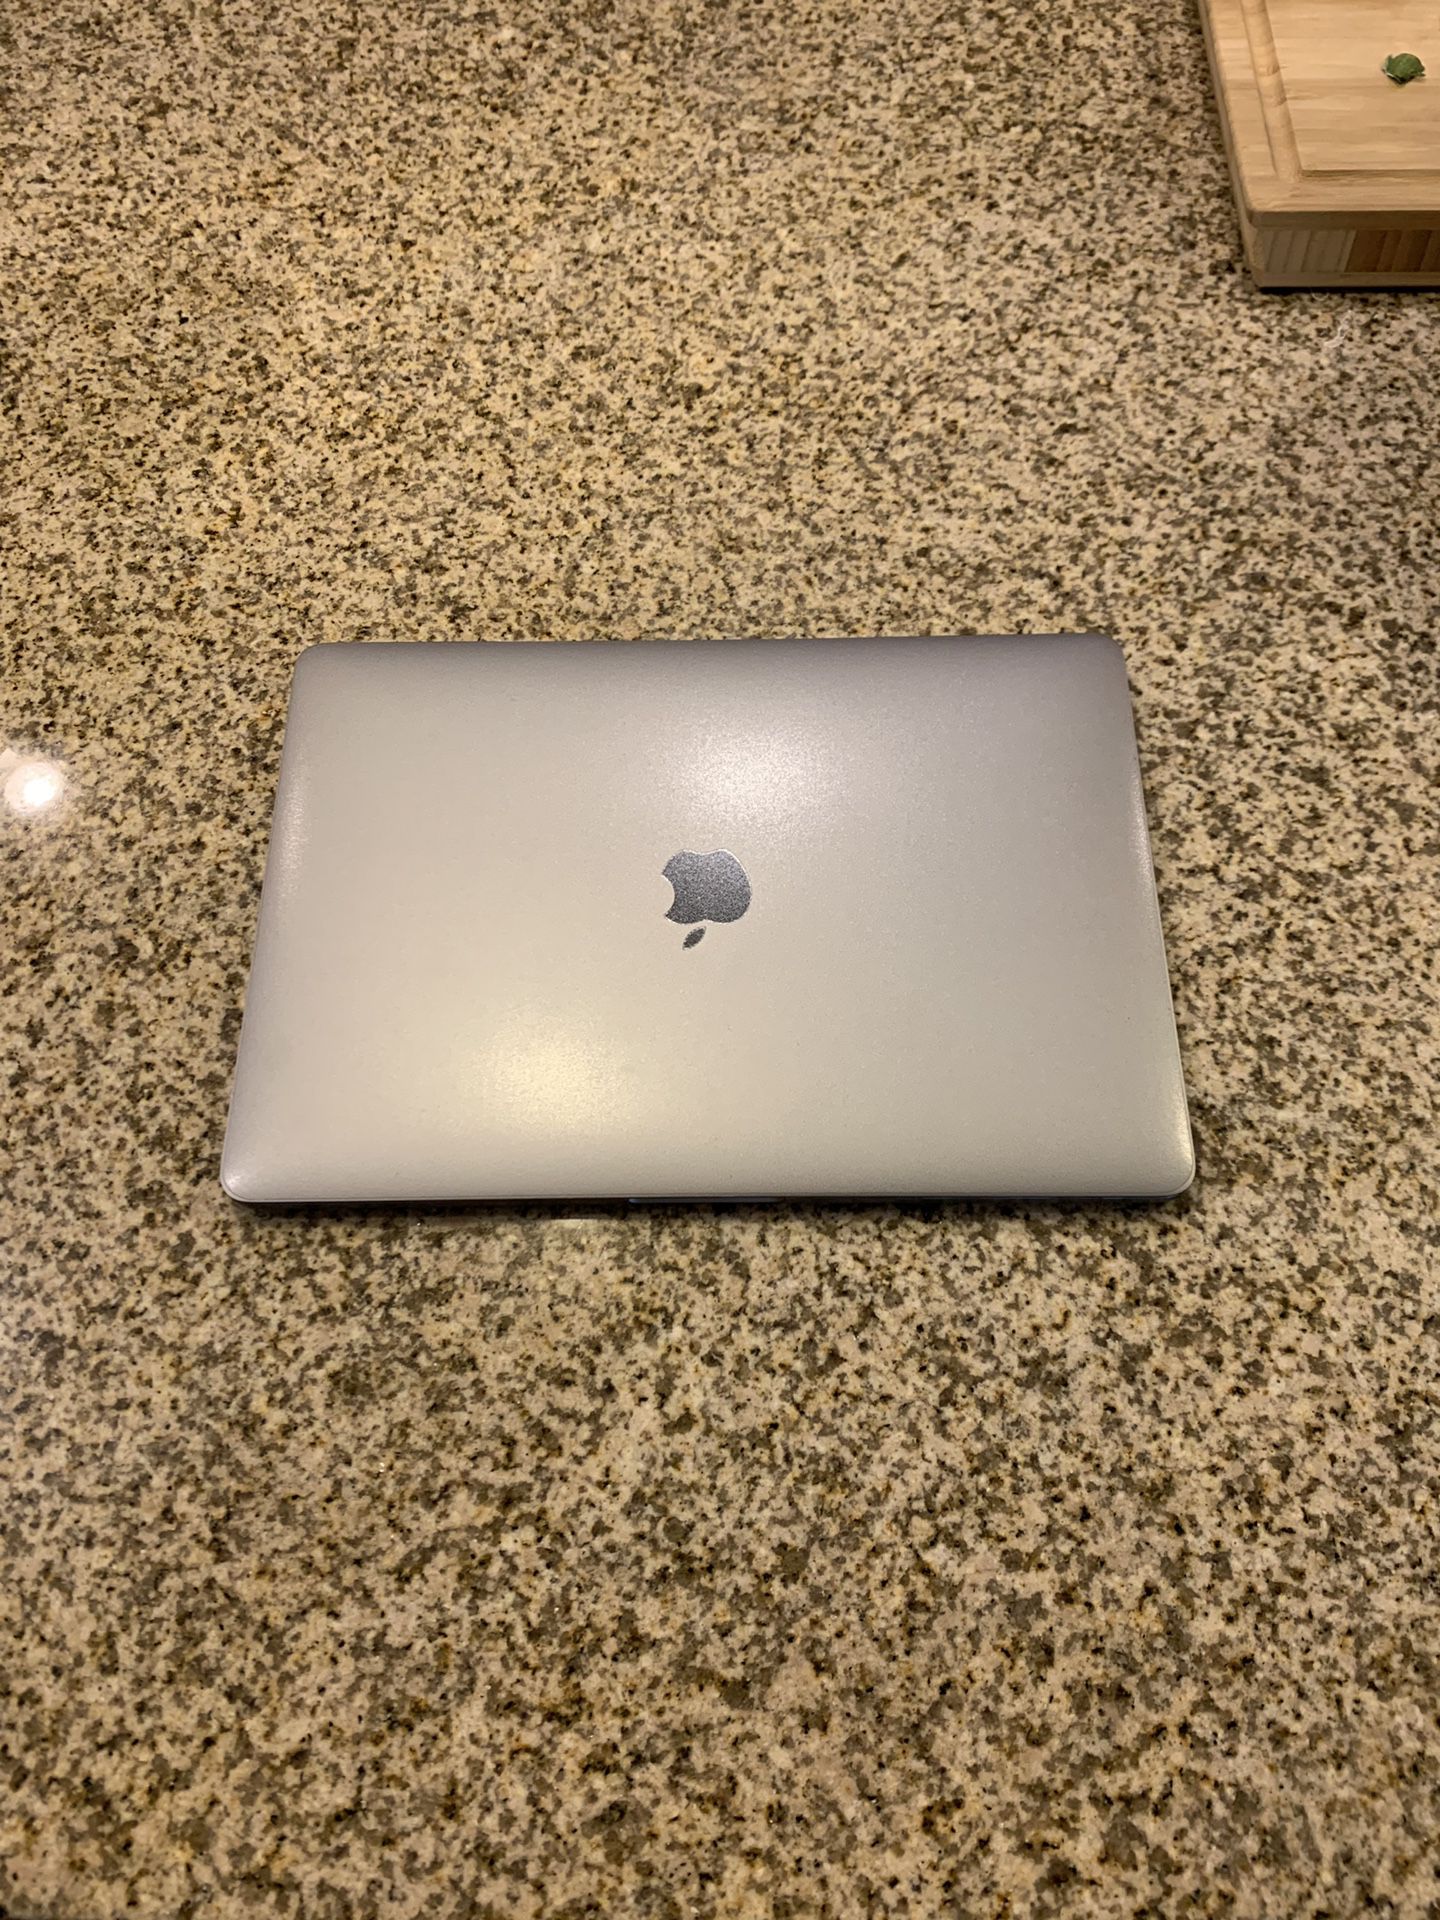 2016 late 13” 256GB Macbook pro with touch bar Space Gray(with korean keyboard)